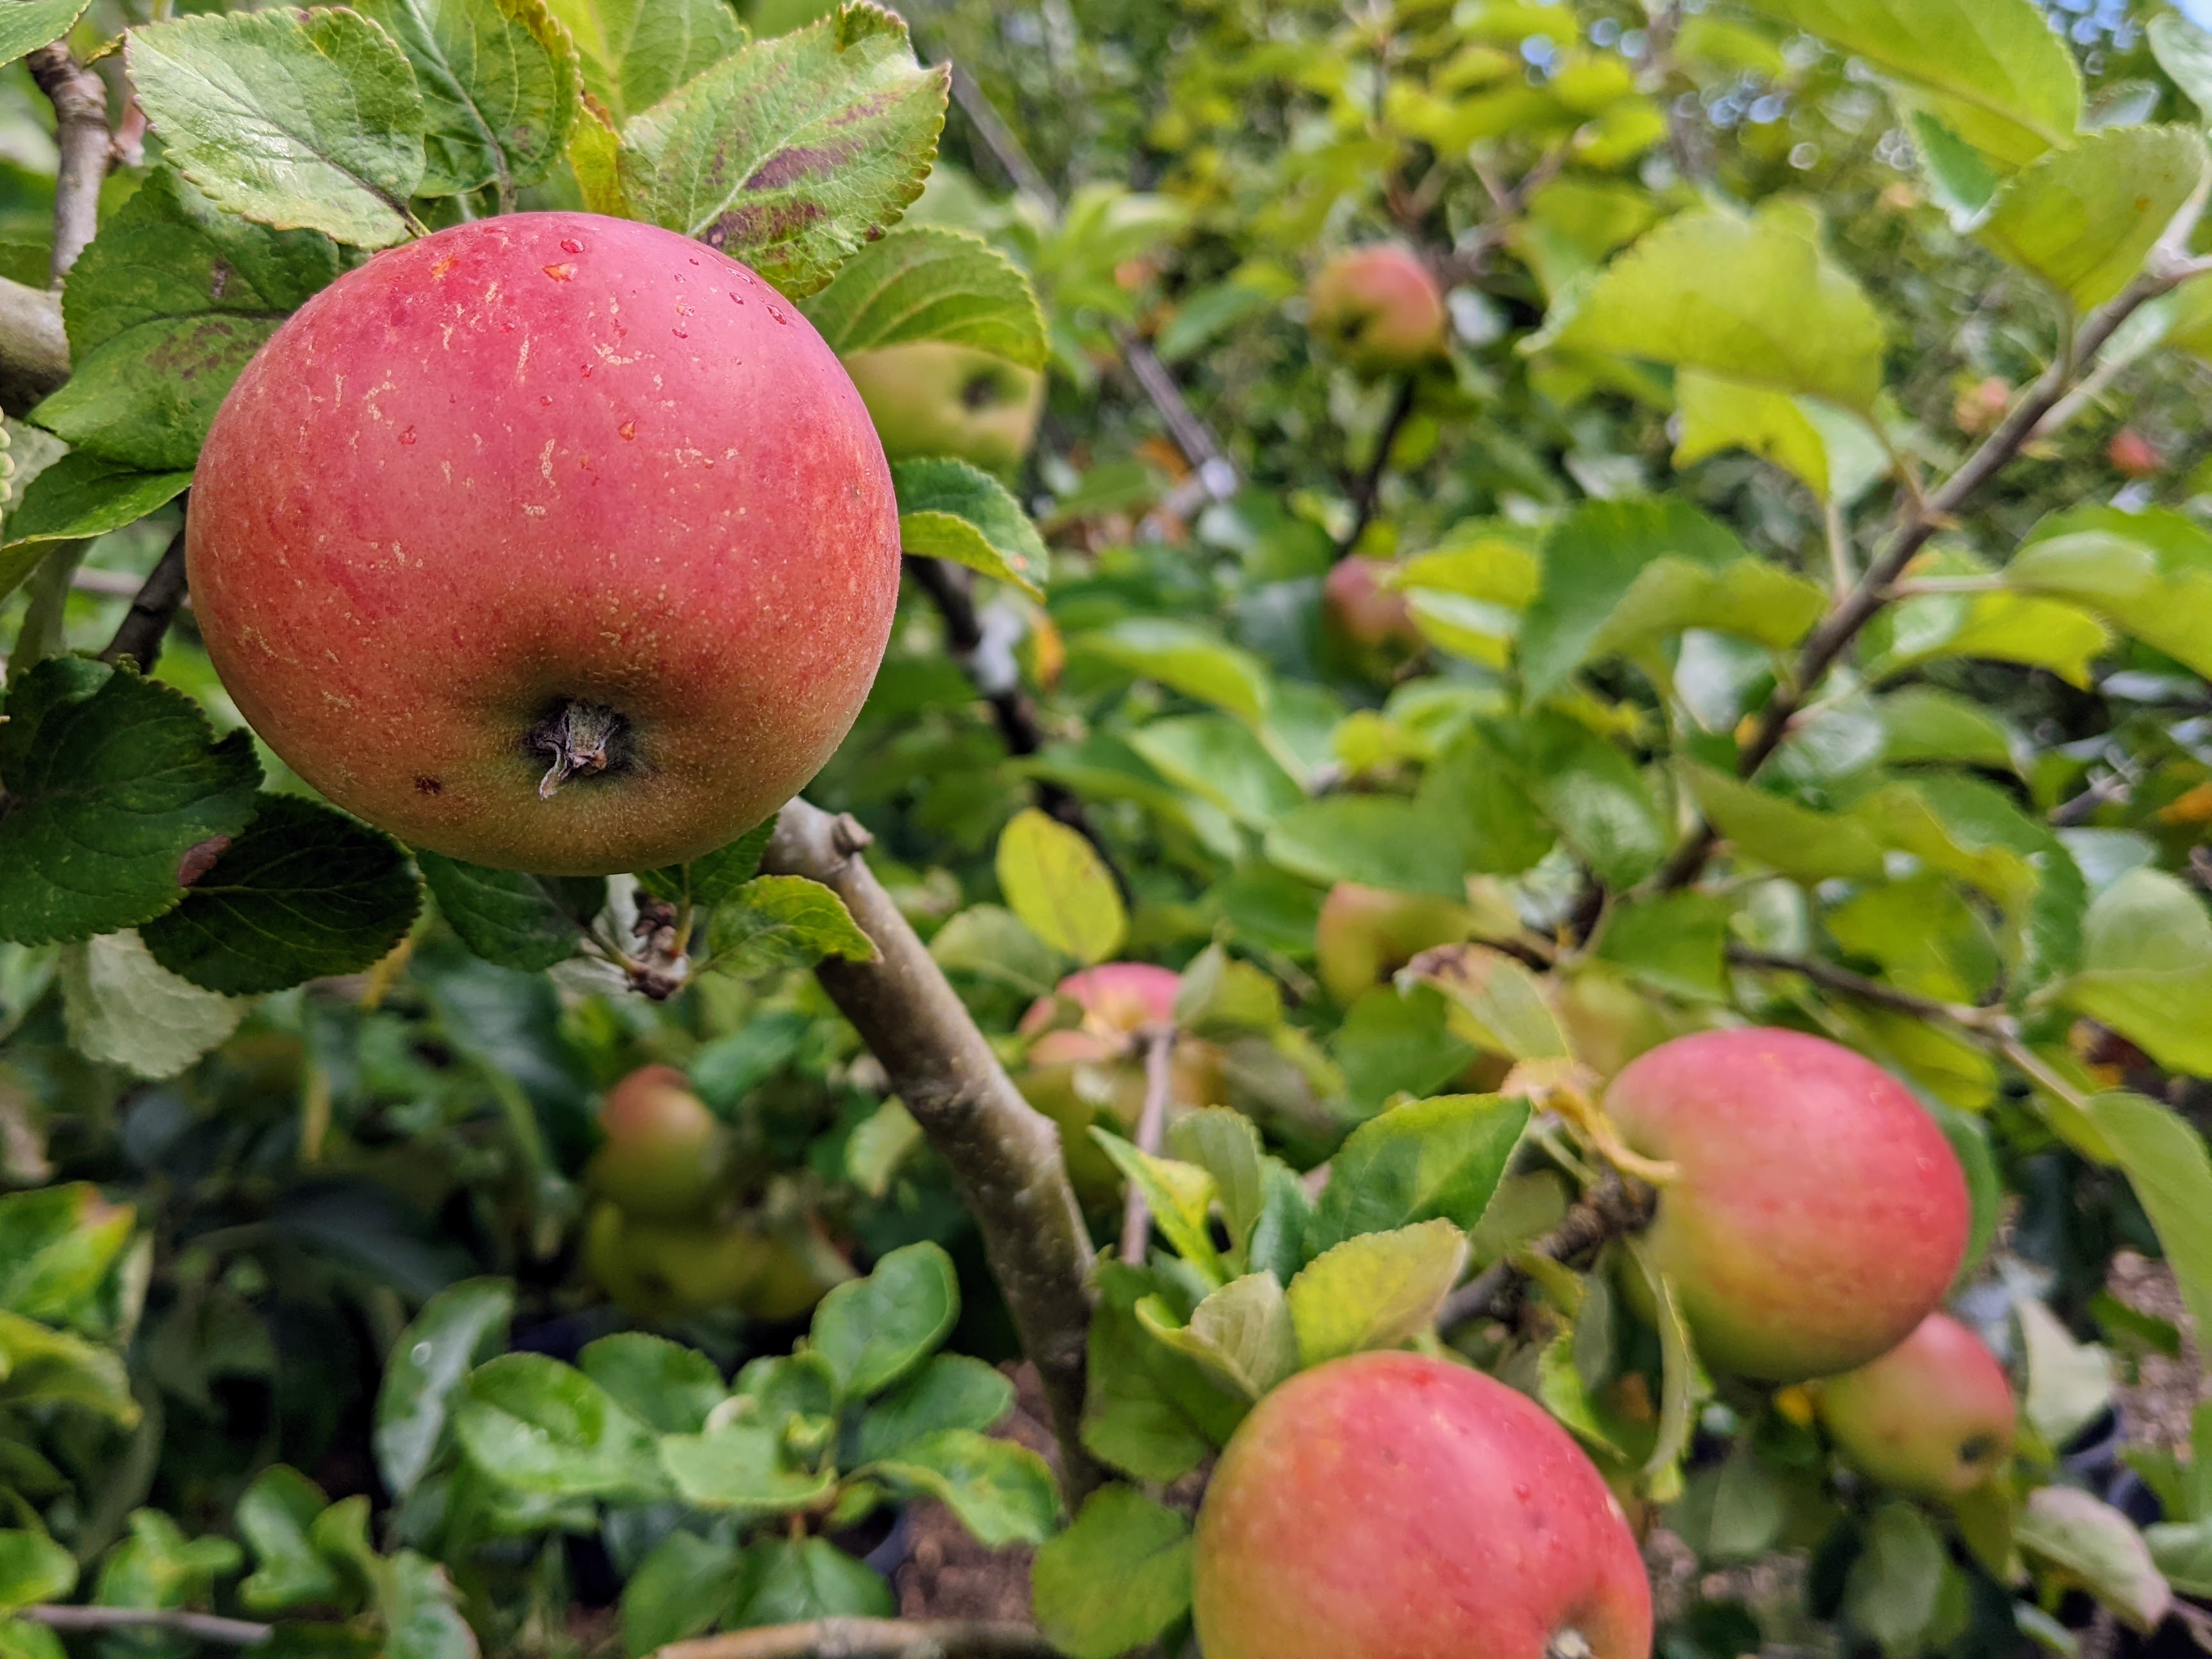 Close up of an apple on a apple tree